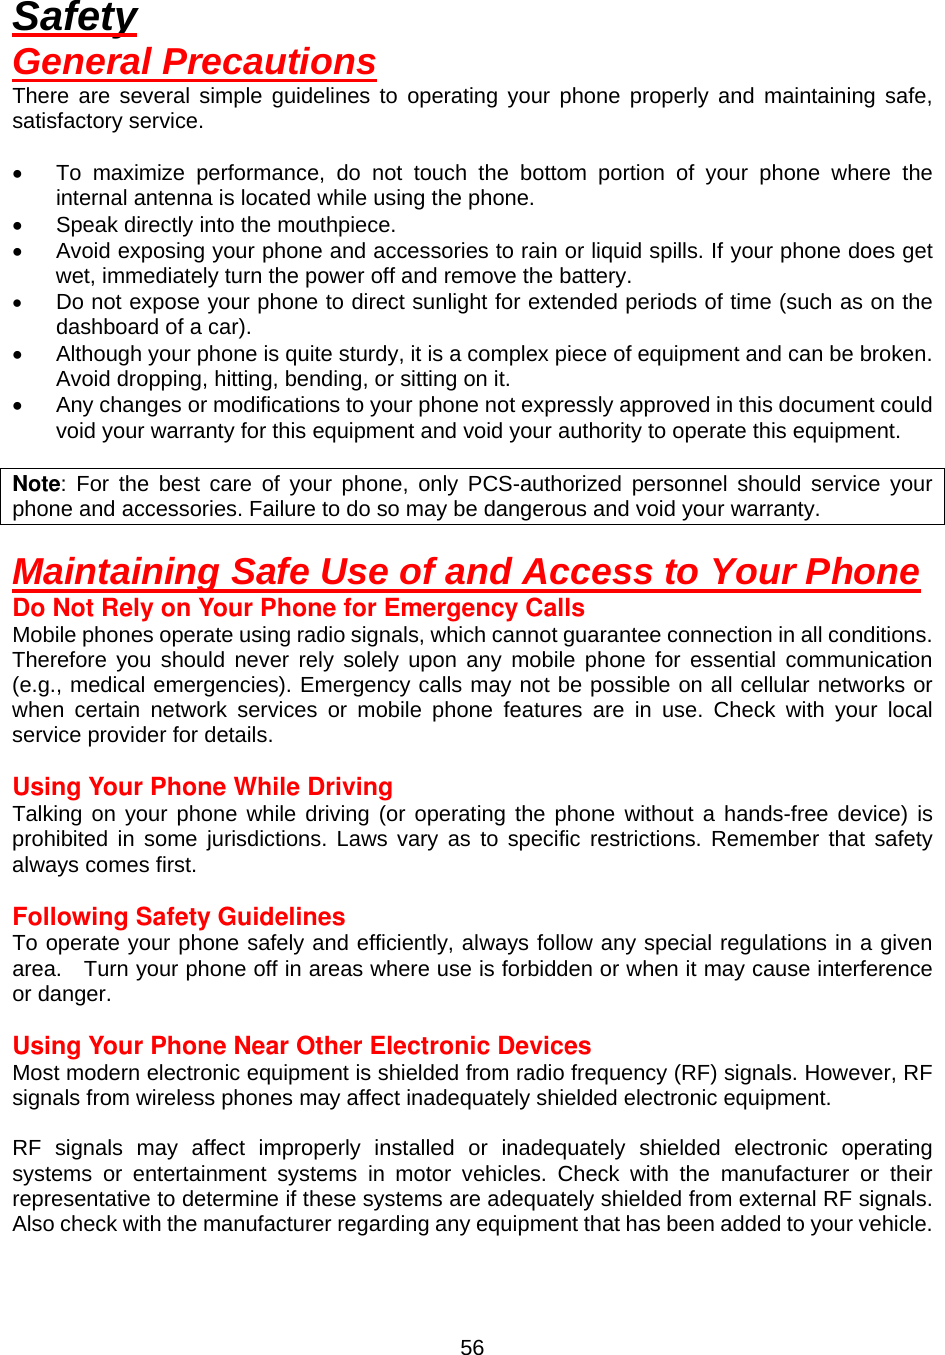  56Safety General Precautions There are several simple guidelines to operating your phone properly and maintaining safe, satisfactory service.  •  To maximize performance, do not touch the bottom portion of your phone where the internal antenna is located while using the phone. •  Speak directly into the mouthpiece. •  Avoid exposing your phone and accessories to rain or liquid spills. If your phone does get wet, immediately turn the power off and remove the battery. •  Do not expose your phone to direct sunlight for extended periods of time (such as on the dashboard of a car). •  Although your phone is quite sturdy, it is a complex piece of equipment and can be broken. Avoid dropping, hitting, bending, or sitting on it. •  Any changes or modifications to your phone not expressly approved in this document could void your warranty for this equipment and void your authority to operate this equipment.  Note: For the best care of your phone, only PCS-authorized personnel should service your phone and accessories. Failure to do so may be dangerous and void your warranty.  Maintaining Safe Use of and Access to Your Phone Do Not Rely on Your Phone for Emergency Calls Mobile phones operate using radio signals, which cannot guarantee connection in all conditions.   Therefore you should never rely solely upon any mobile phone for essential communication (e.g., medical emergencies). Emergency calls may not be possible on all cellular networks or when certain network services or mobile phone features are in use. Check with your local service provider for details.  Using Your Phone While Driving Talking on your phone while driving (or operating the phone without a hands-free device) is prohibited in some jurisdictions. Laws vary as to specific restrictions. Remember that safety always comes first.  Following Safety Guidelines To operate your phone safely and efficiently, always follow any special regulations in a given area.    Turn your phone off in areas where use is forbidden or when it may cause interference or danger.  Using Your Phone Near Other Electronic Devices Most modern electronic equipment is shielded from radio frequency (RF) signals. However, RF signals from wireless phones may affect inadequately shielded electronic equipment.    RF signals may affect improperly installed or inadequately shielded electronic operating systems or entertainment systems in motor vehicles. Check with the manufacturer or their representative to determine if these systems are adequately shielded from external RF signals. Also check with the manufacturer regarding any equipment that has been added to your vehicle.   